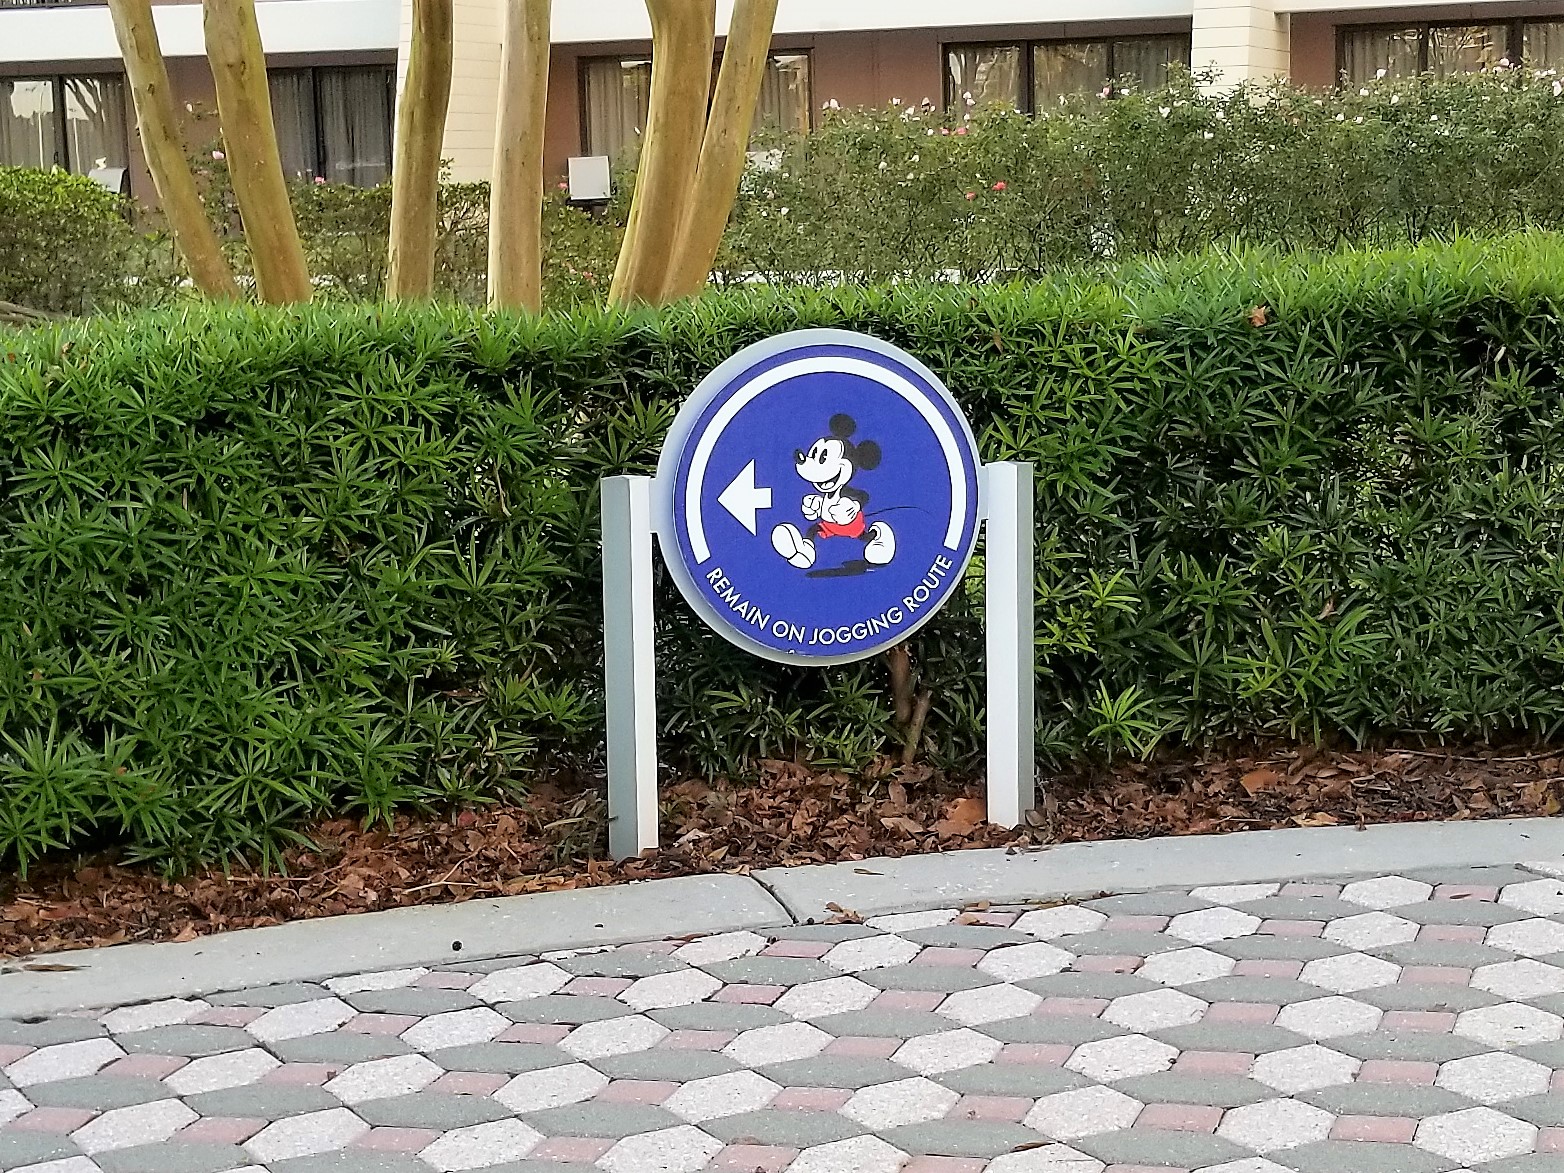 "Jogging Path" at Disney World's Contemprary Report